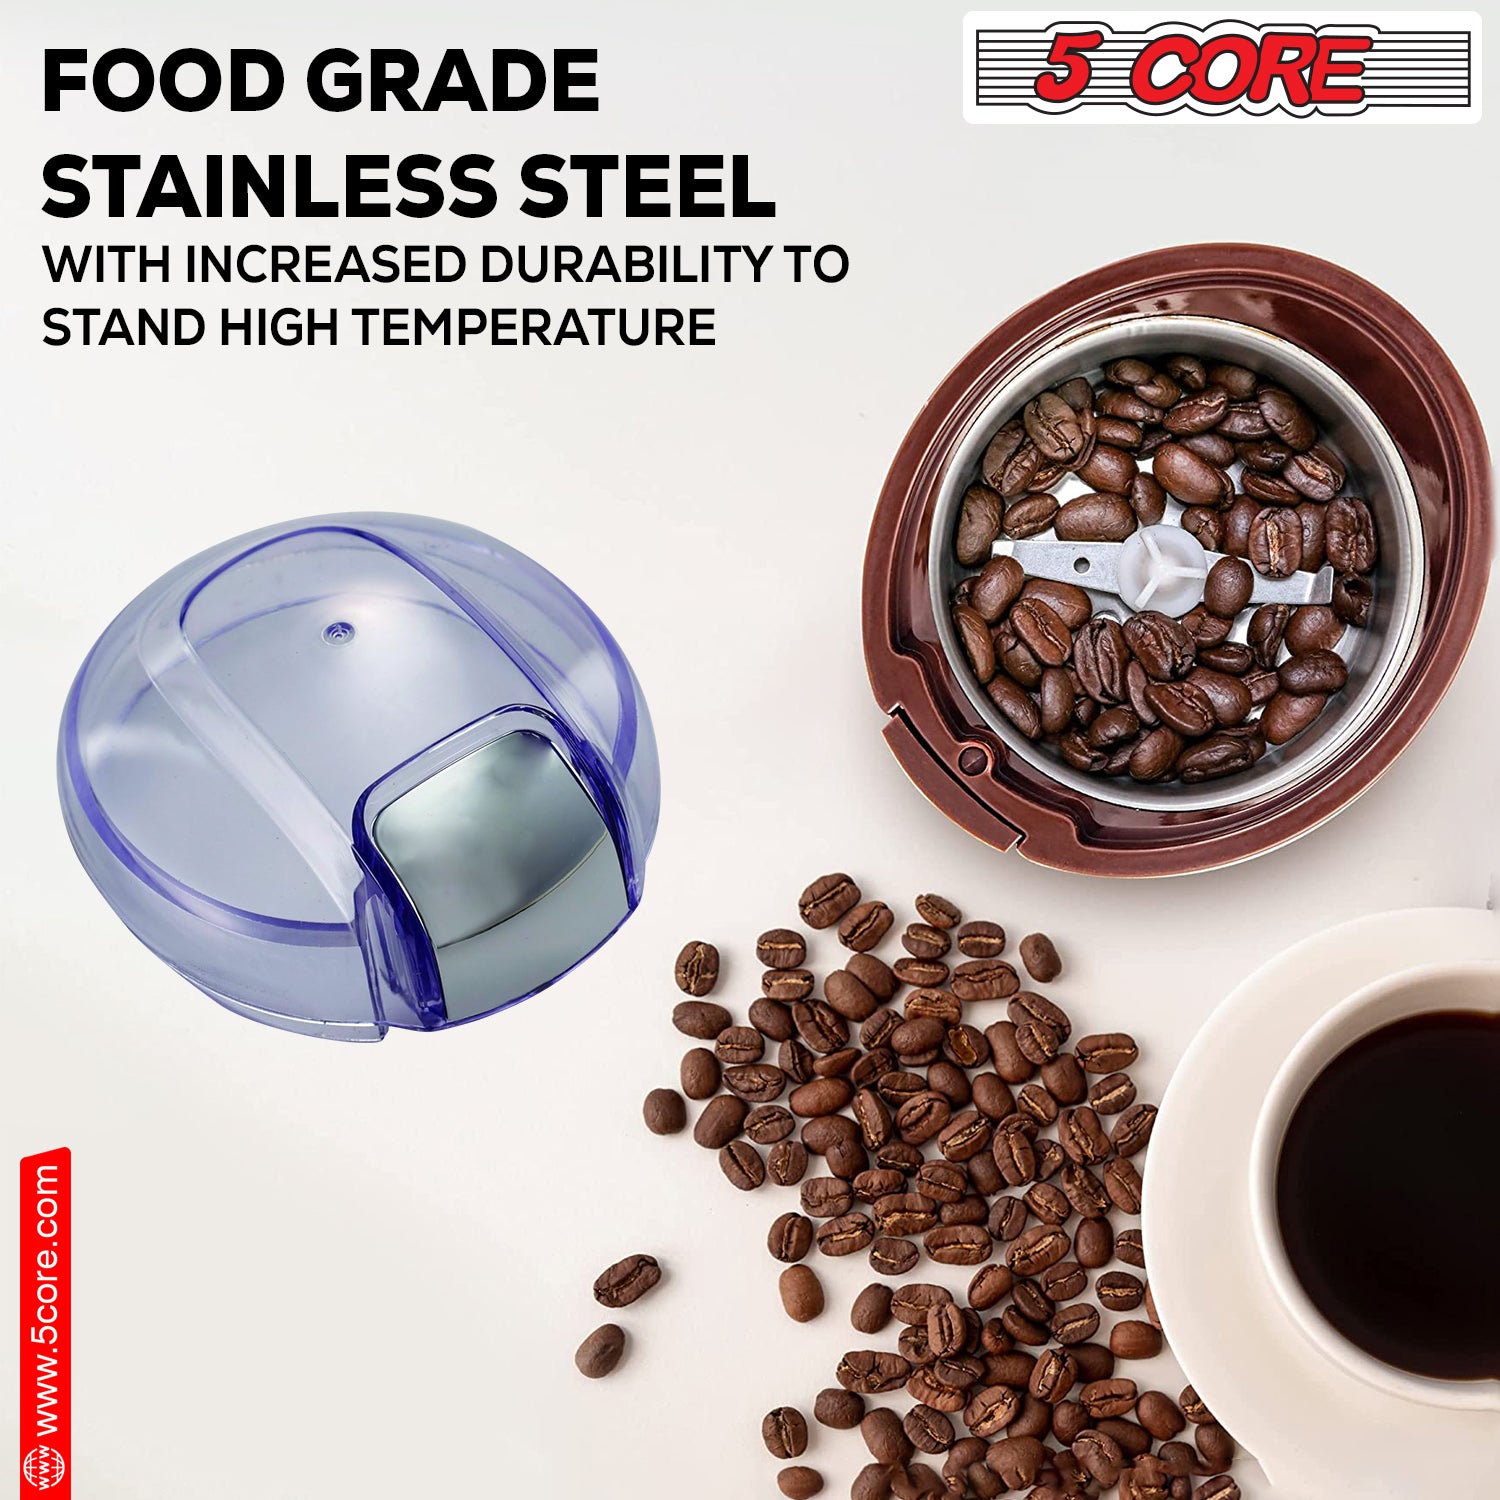 Experience Freshly Ground Beans with 5 Core’s 150W Electric Grinder, Brown Finish